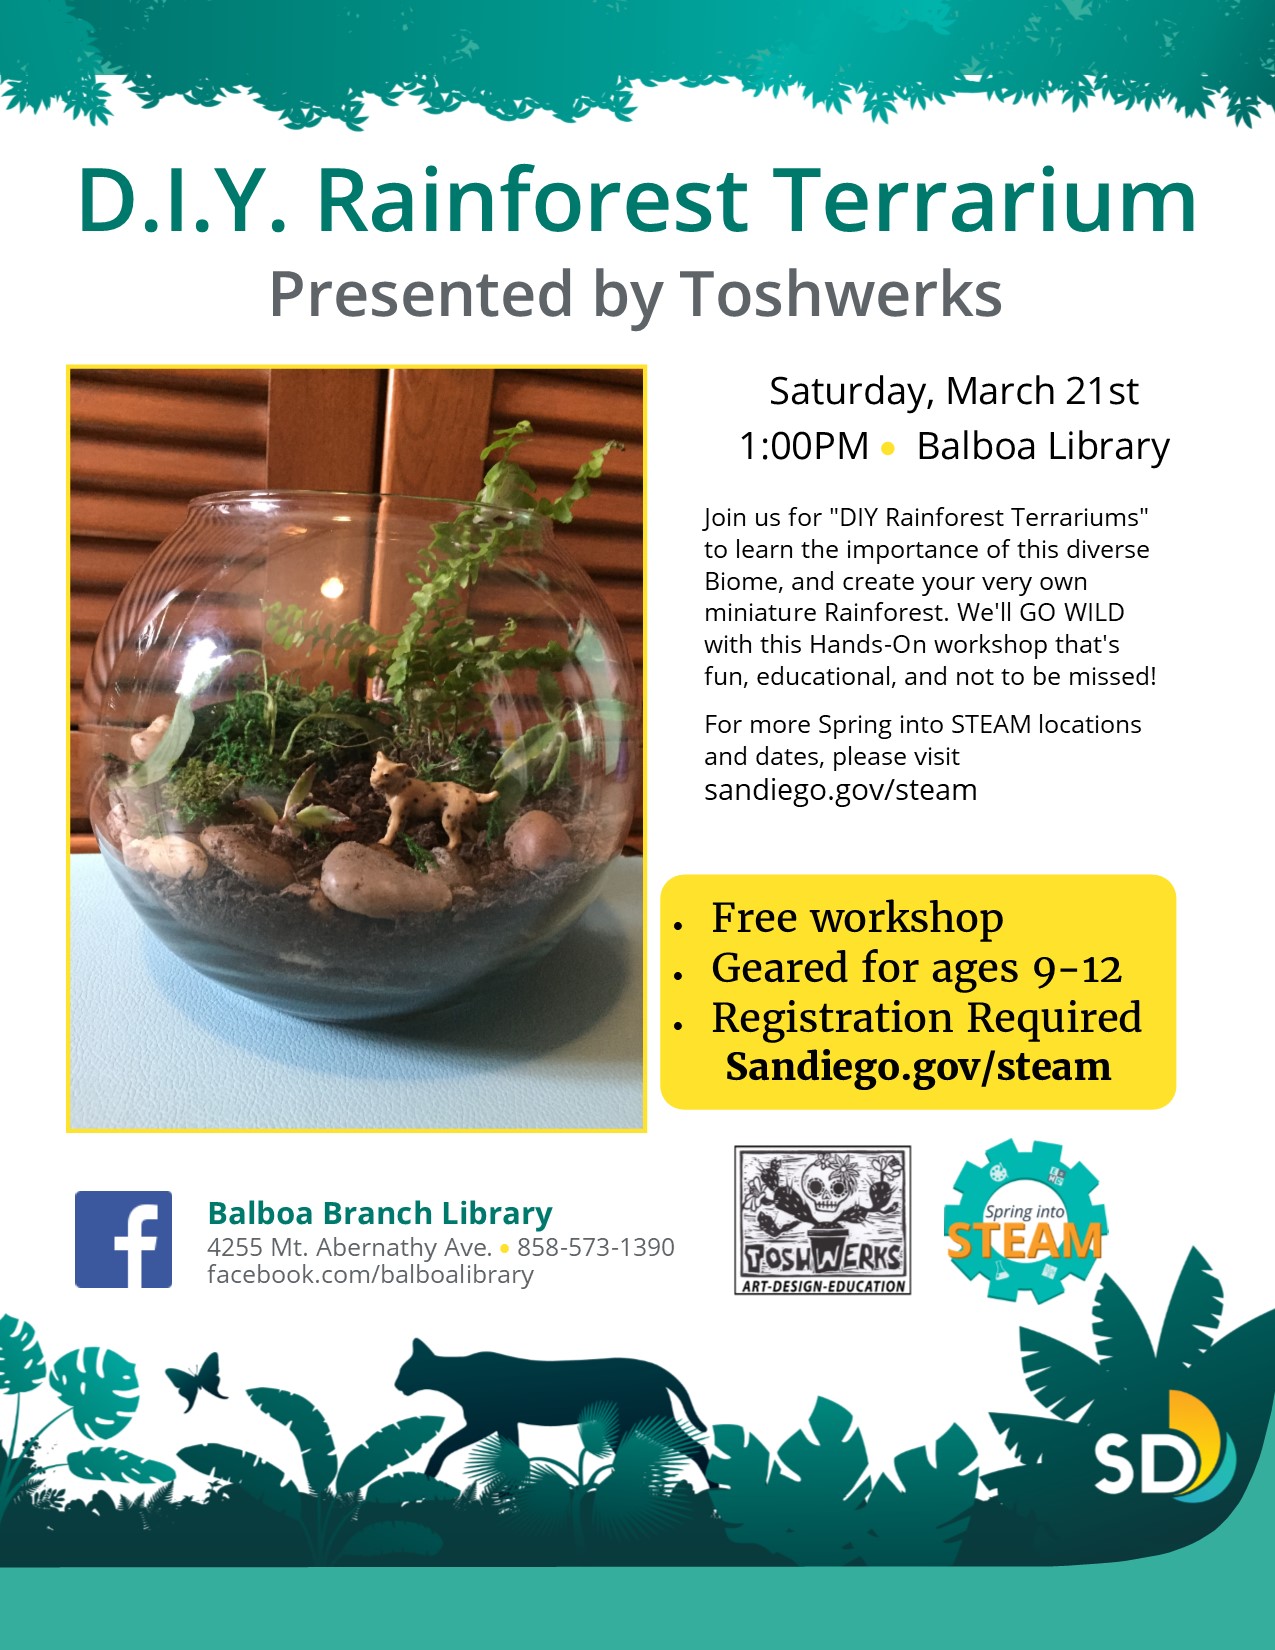 Flyer with picture of terrarium